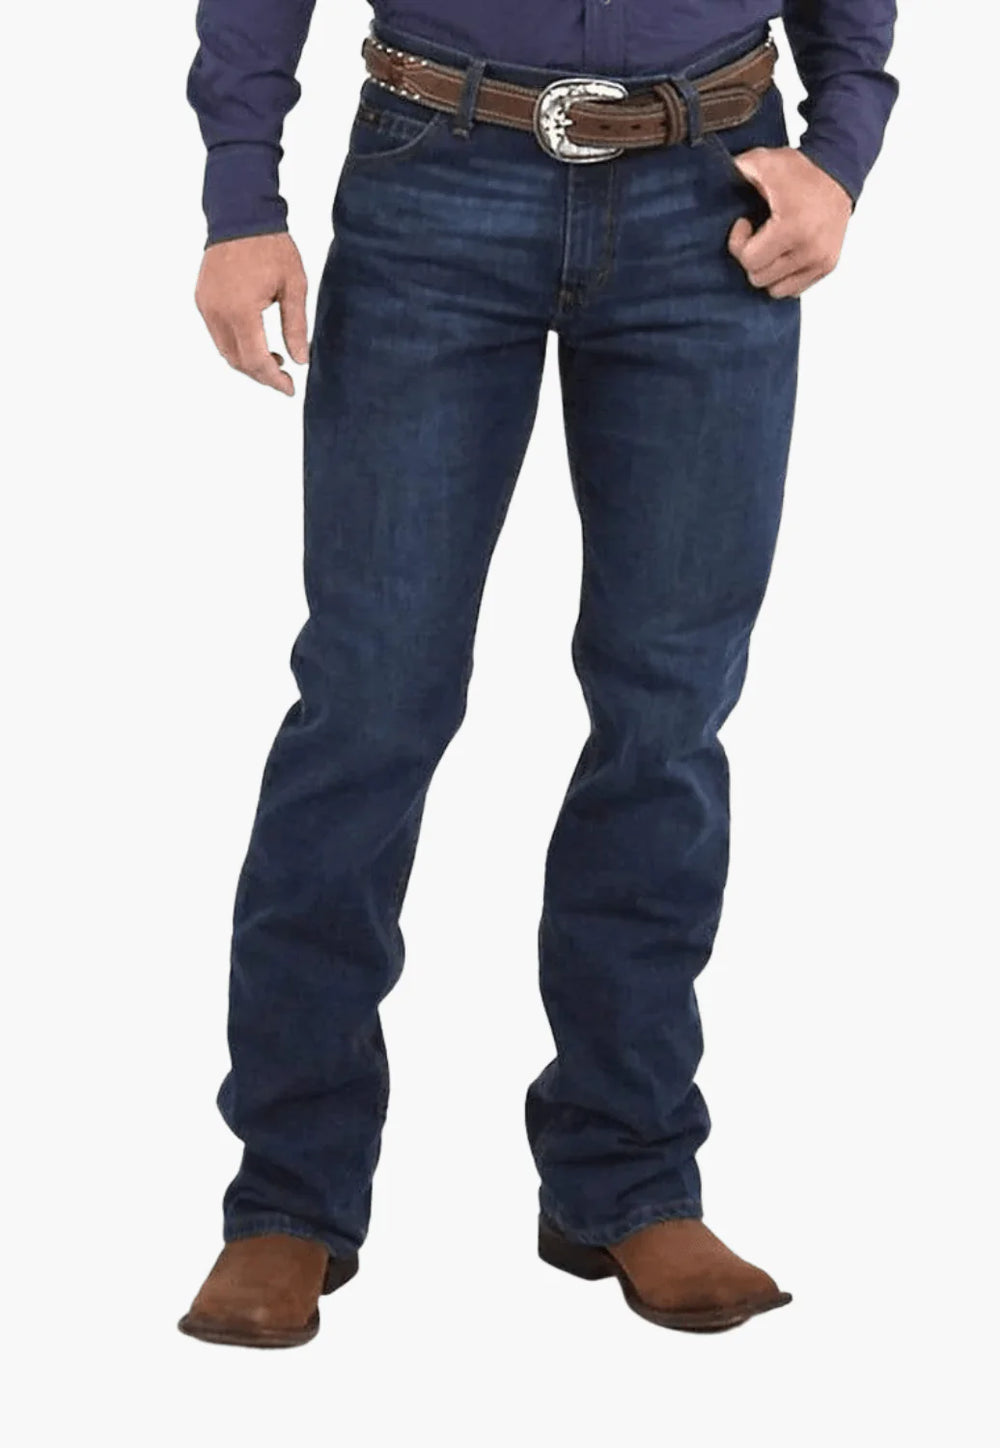 Wrangler - Dillon 20X Competition Slim Fit Jeans